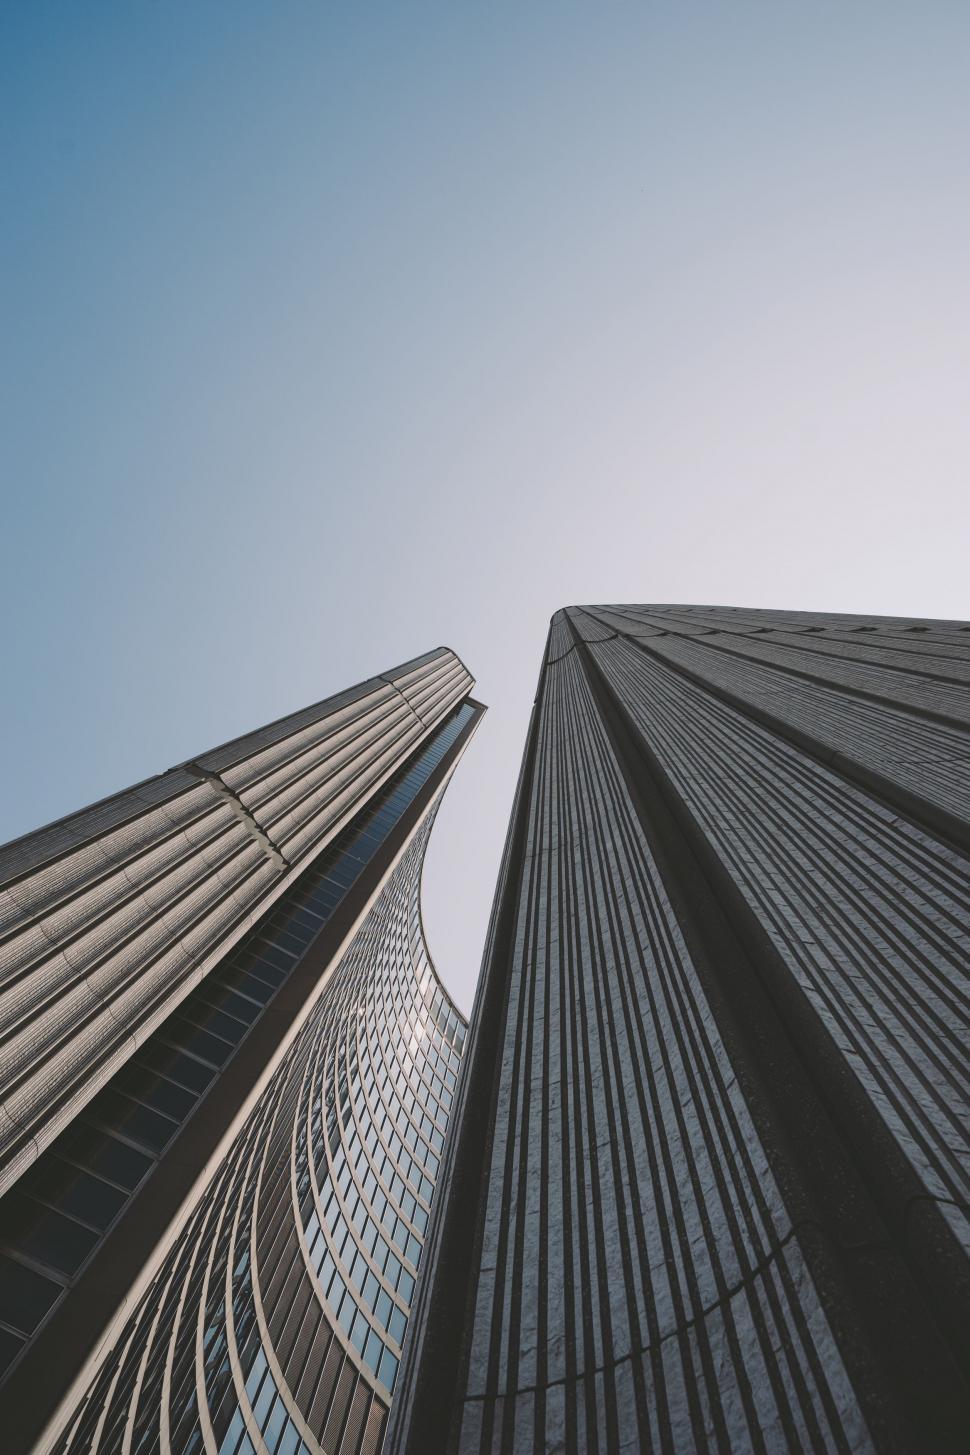 Free Image of Looking Up at Two Tall Buildings in a City 